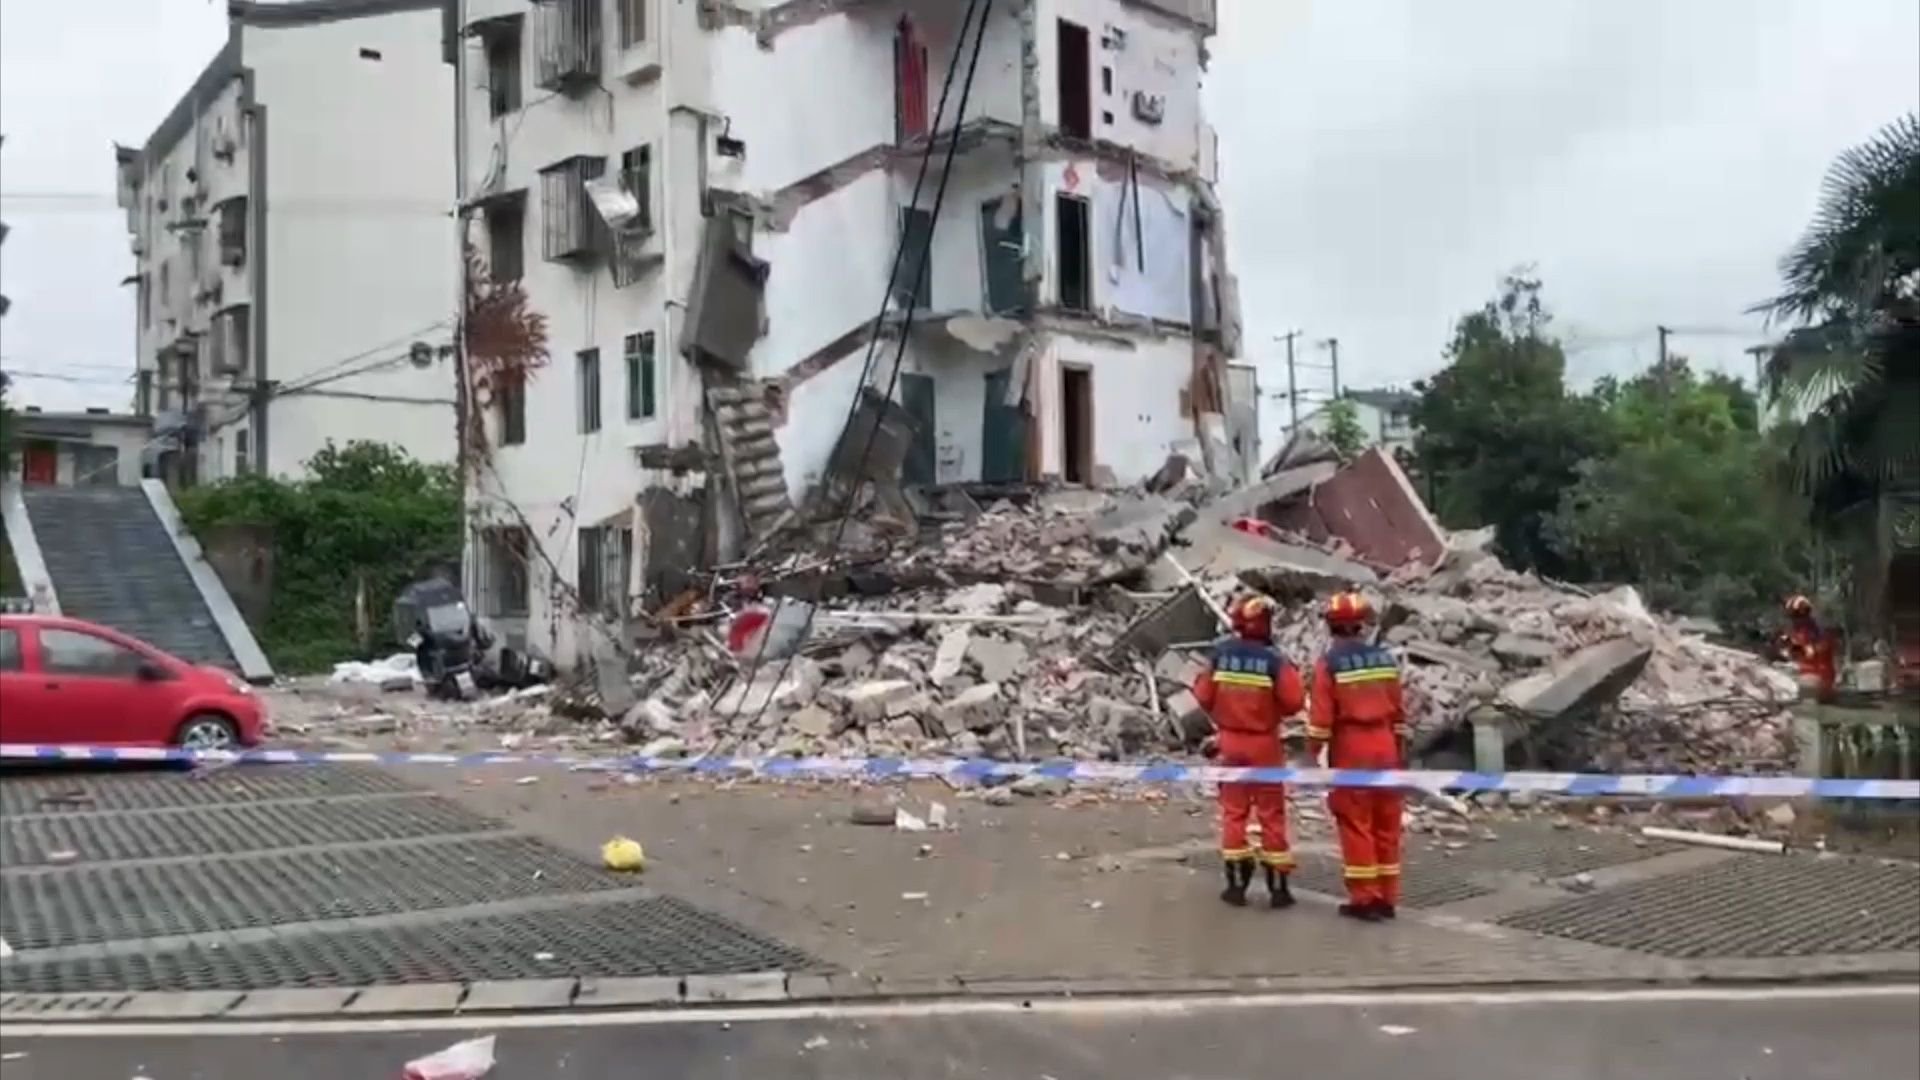  One side of a building in a community in Tongling City, Anhui Province collapsed, and emergency rescue was under way. The scene was exposed